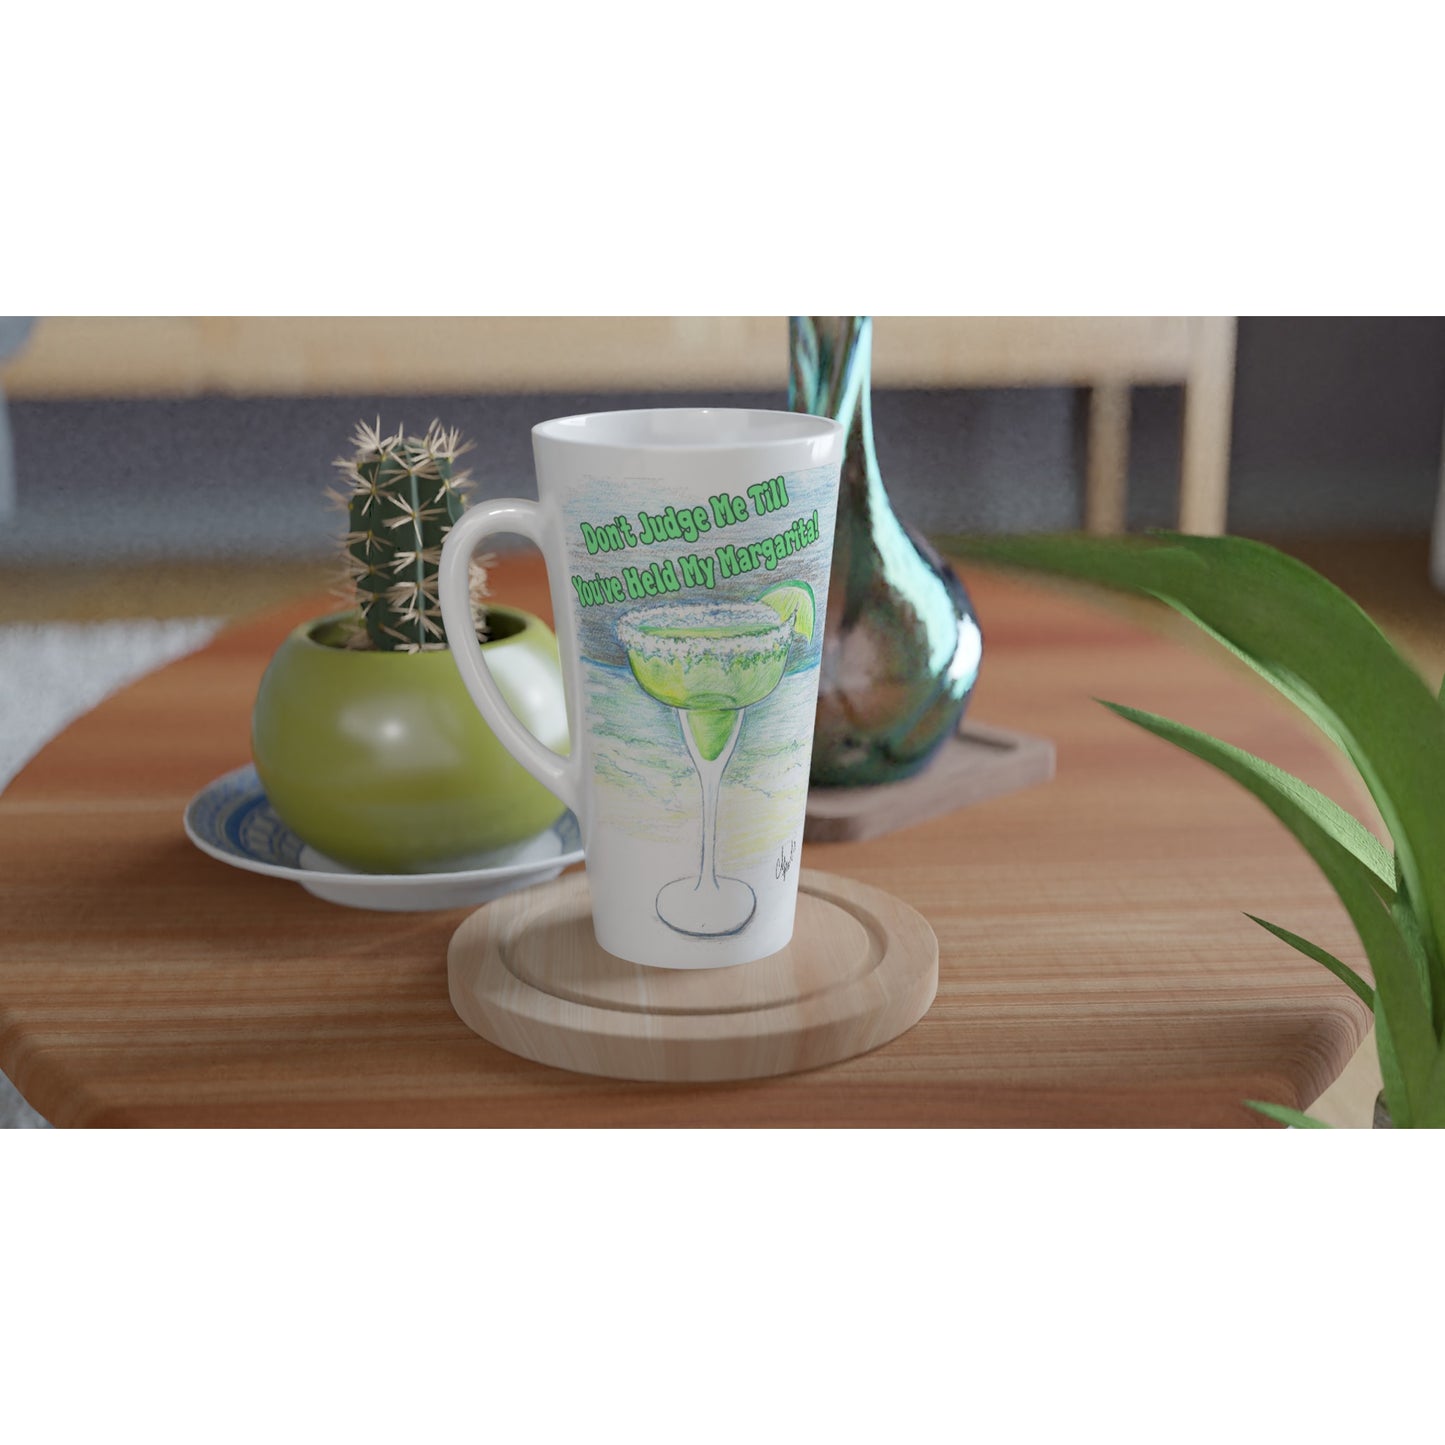 A Seventeener white ceramic 17oz mug with motto Don't Judge Me till You've Held my Margarita dishwasher and microwave safe from WhatYa Say Apparel sitting on coaster on coffee table with green potted cactus and silver vase.